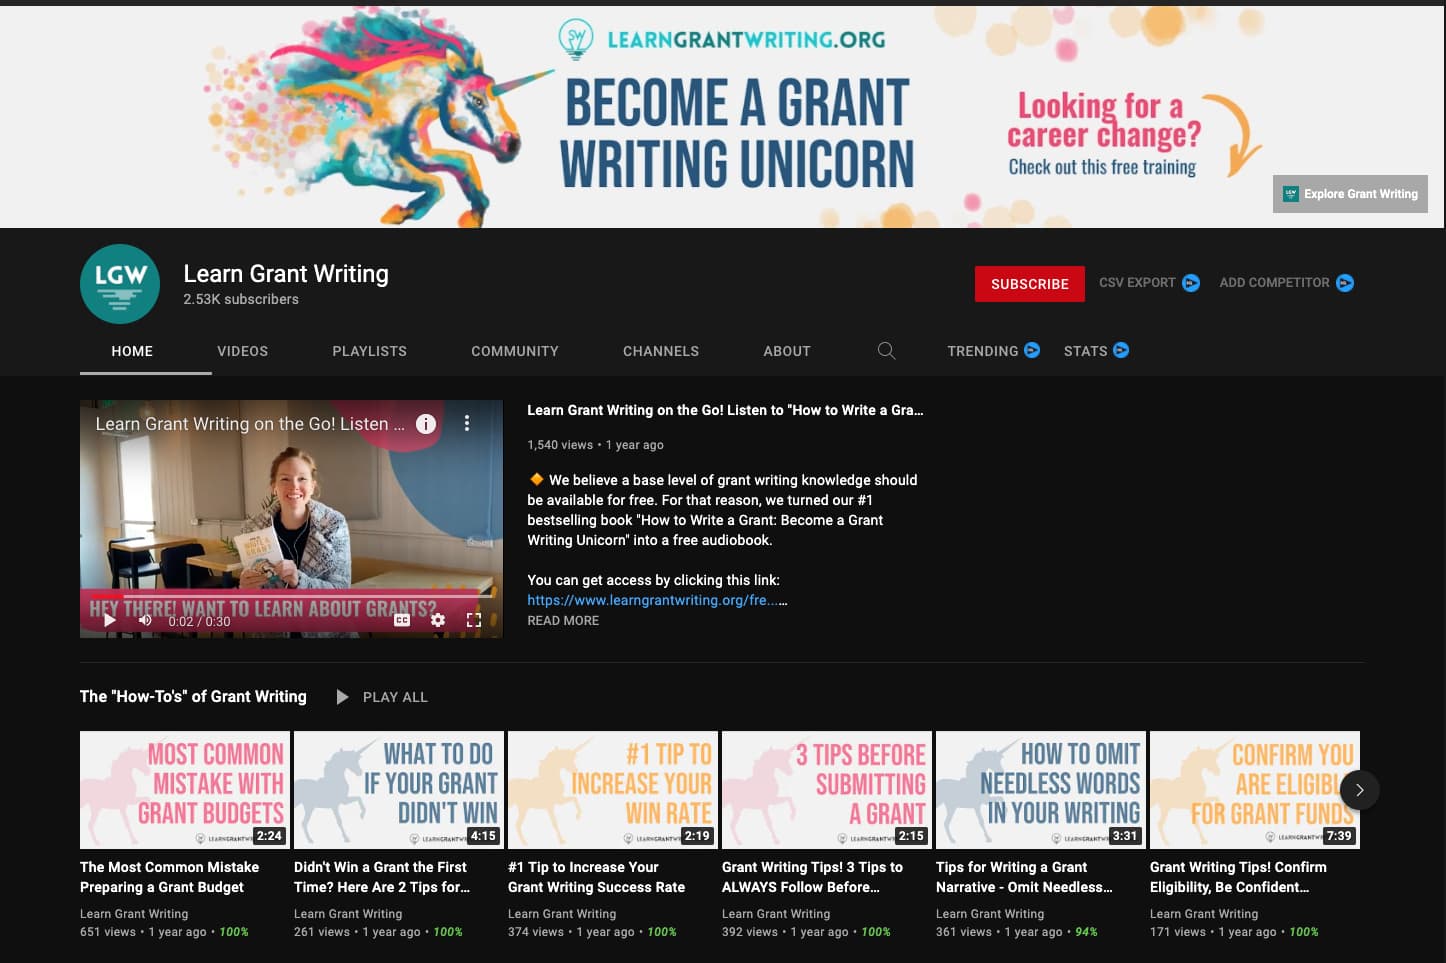 How To Write A Grant Starter Kit - Free Grant Writing Classes Online